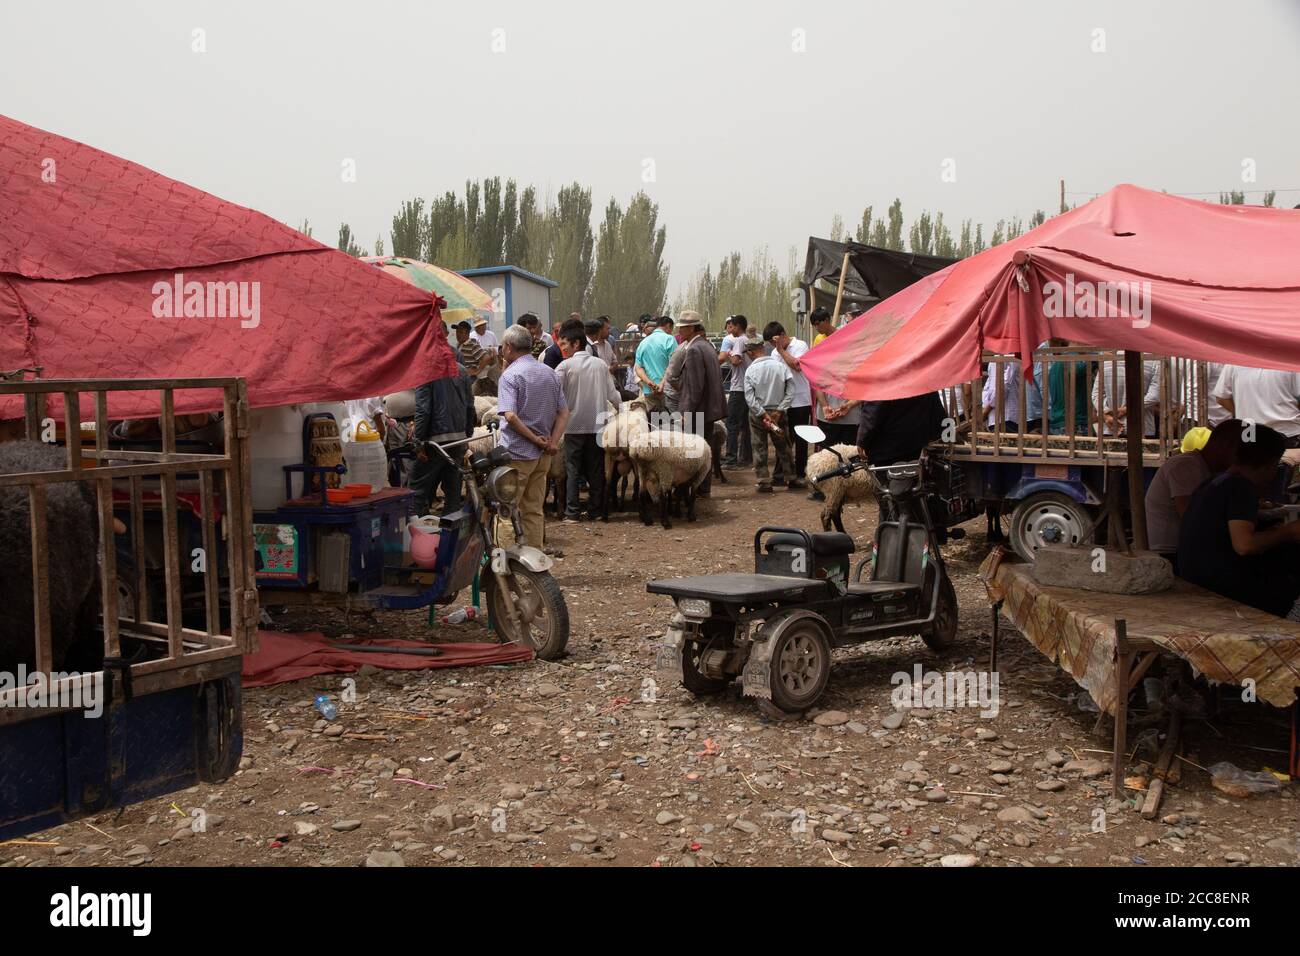 KASHGAR, CHINA: A group of Uyghur man trying to sell their sheep at the sunday market near Kashgar in the Xinjiang Uyghur Autonomous Region Stock Photo